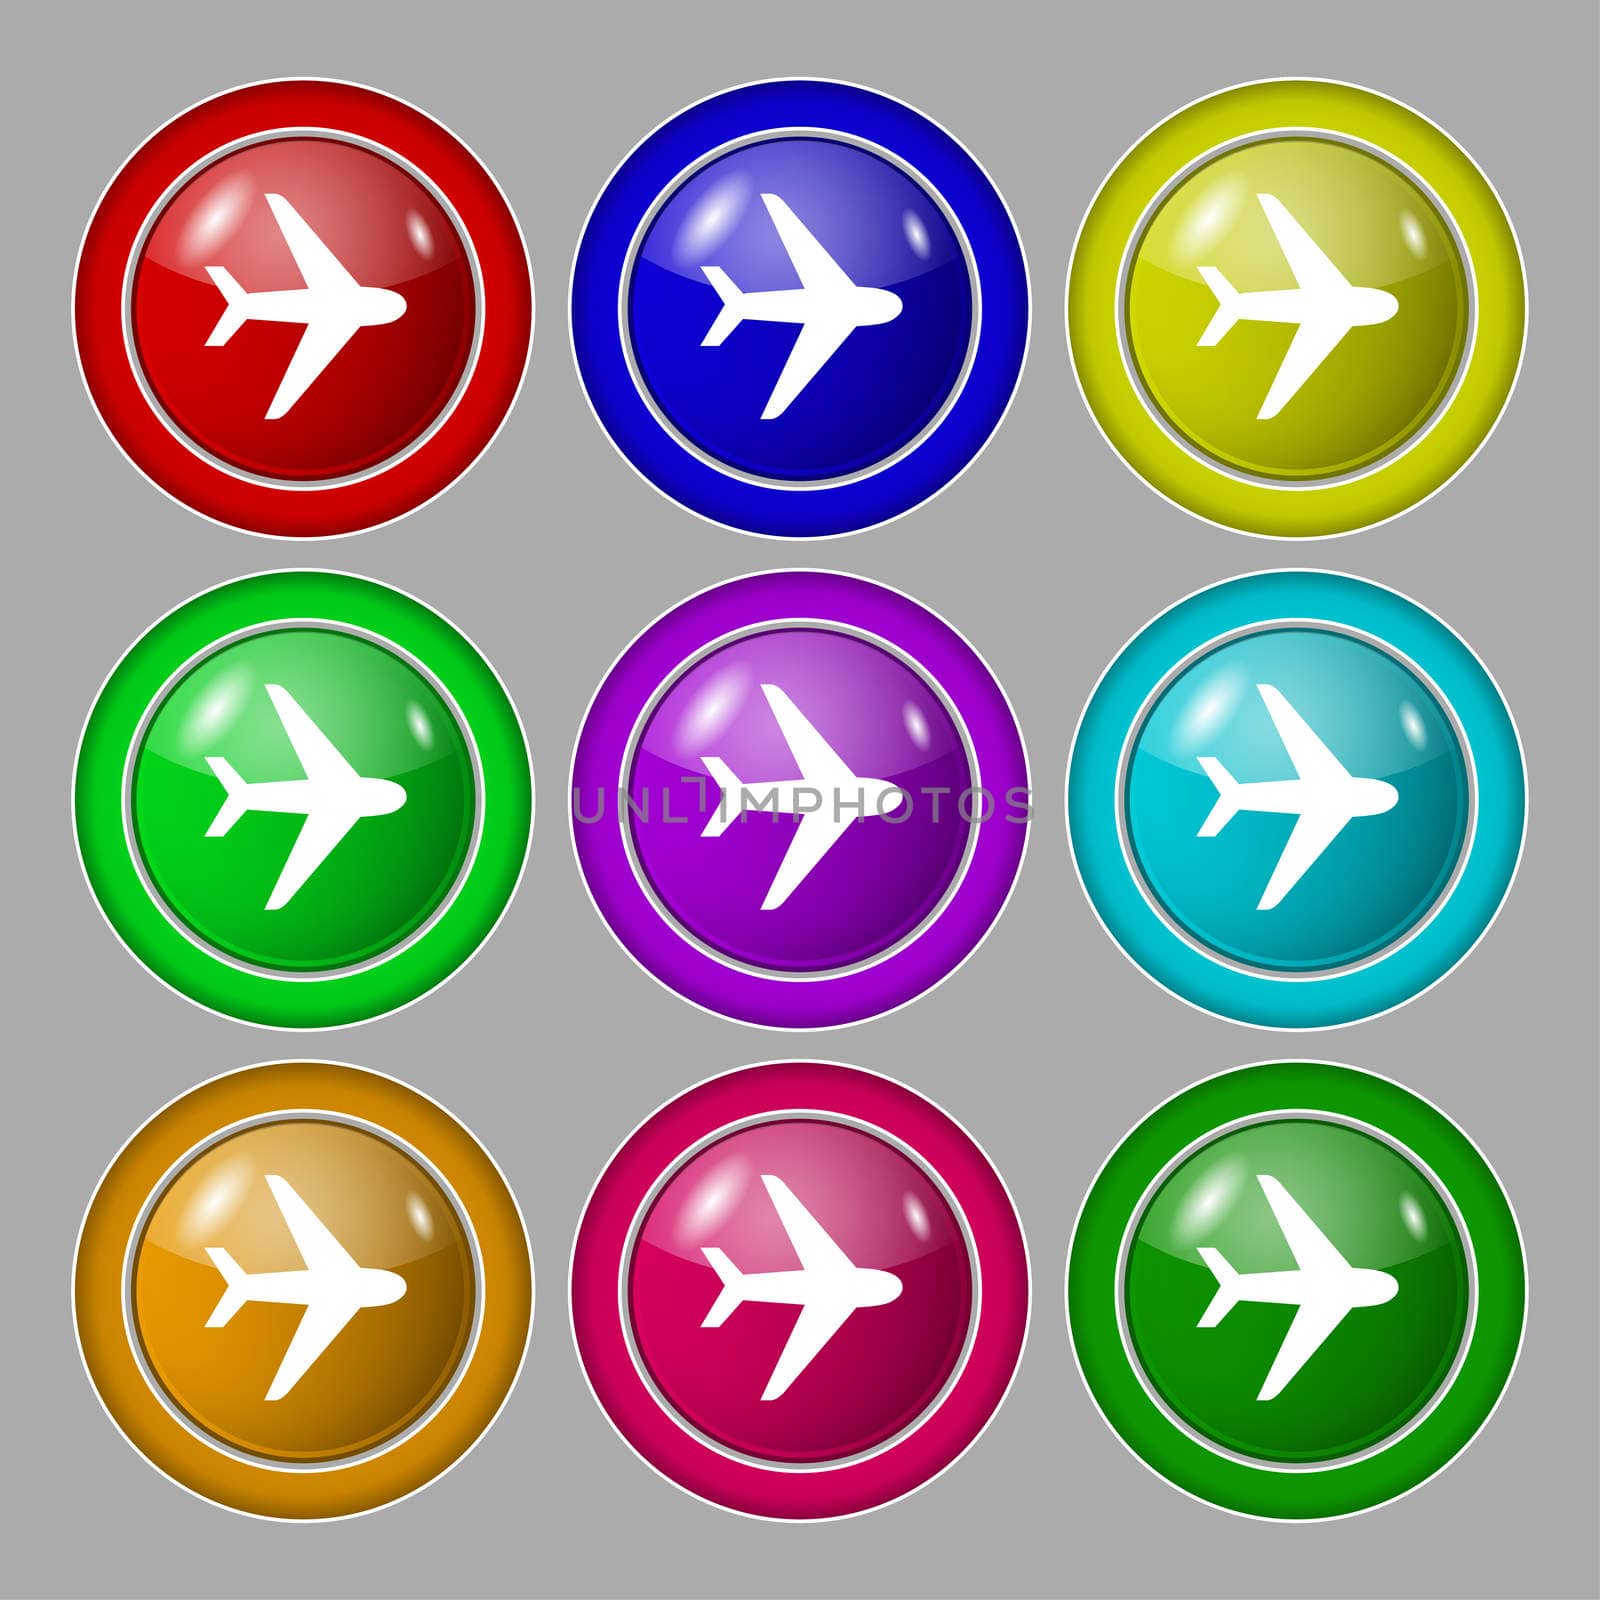 Plane icon sign. symbol on nine round colourful buttons. illustration